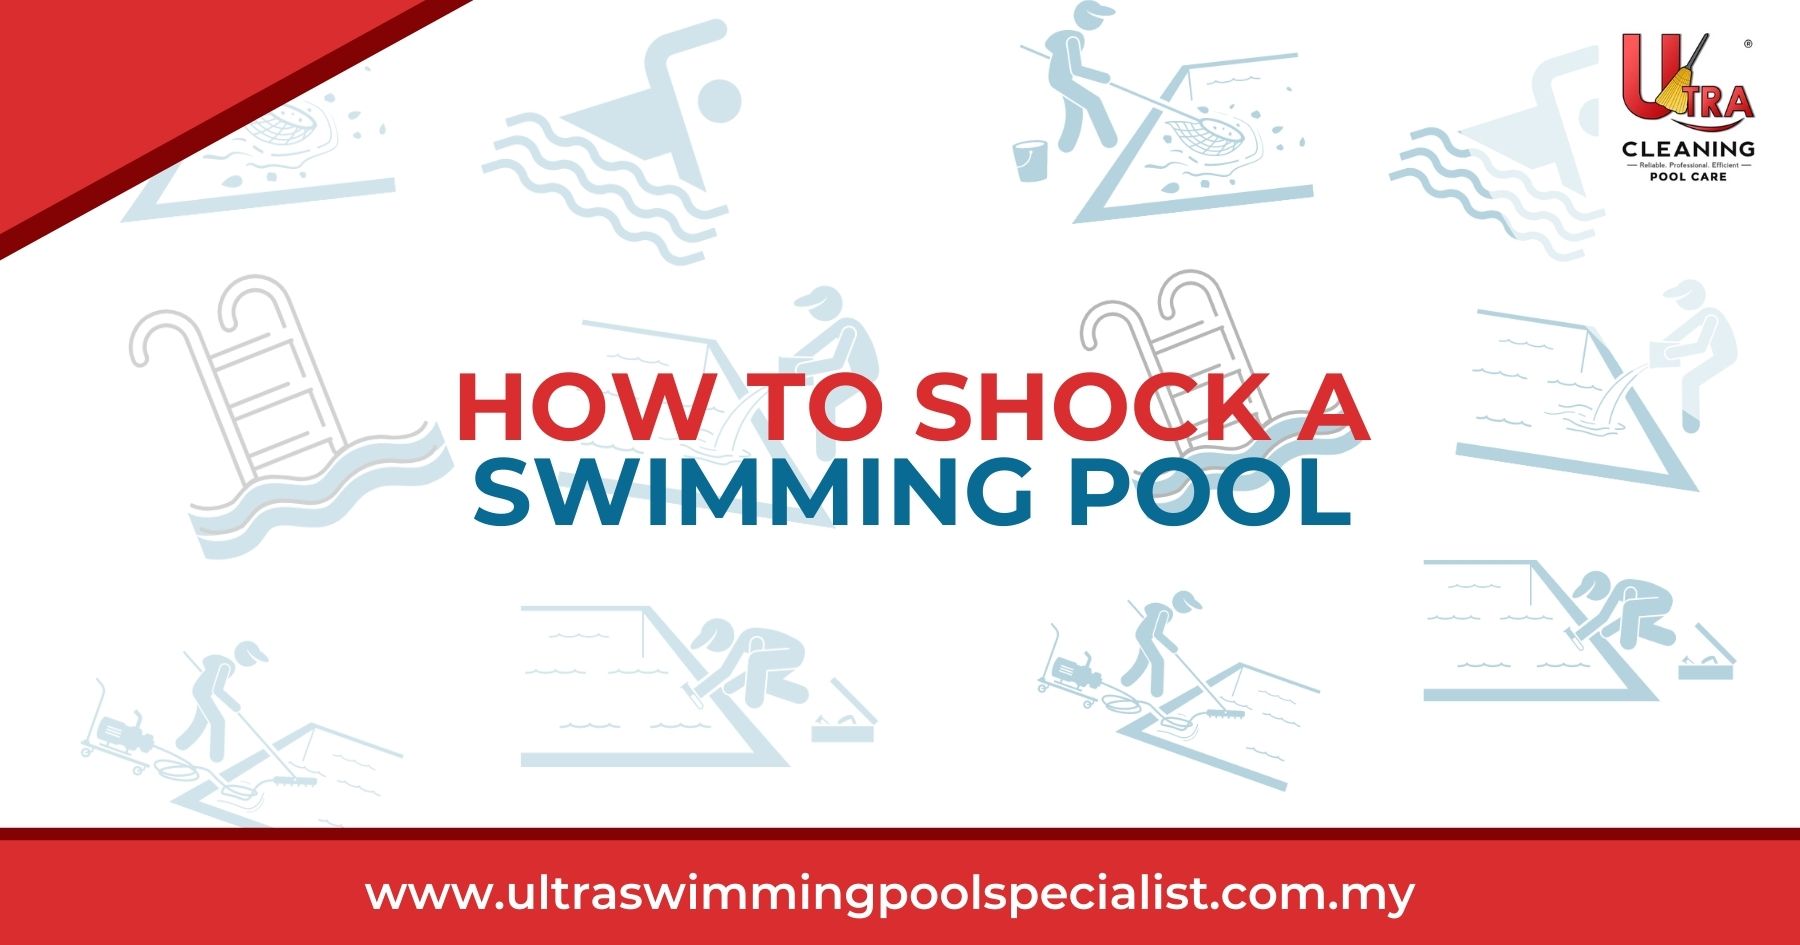 How To Shock a Swimming Pool